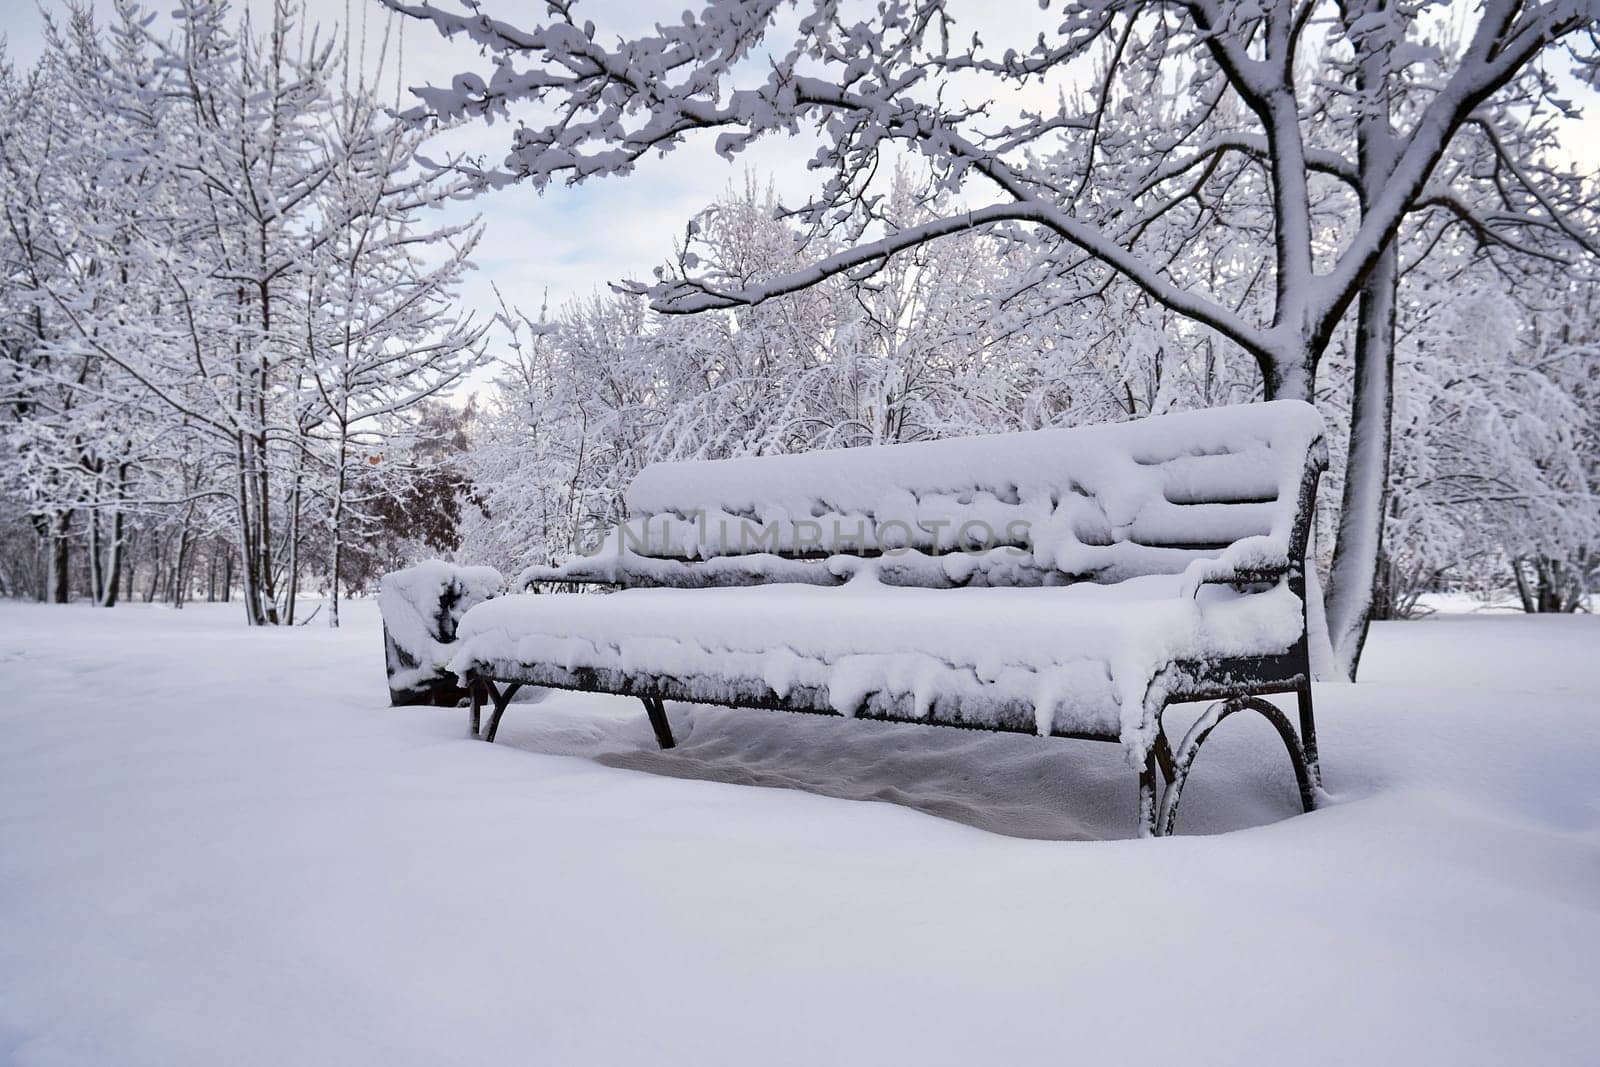 A bench in a city park covered with snow